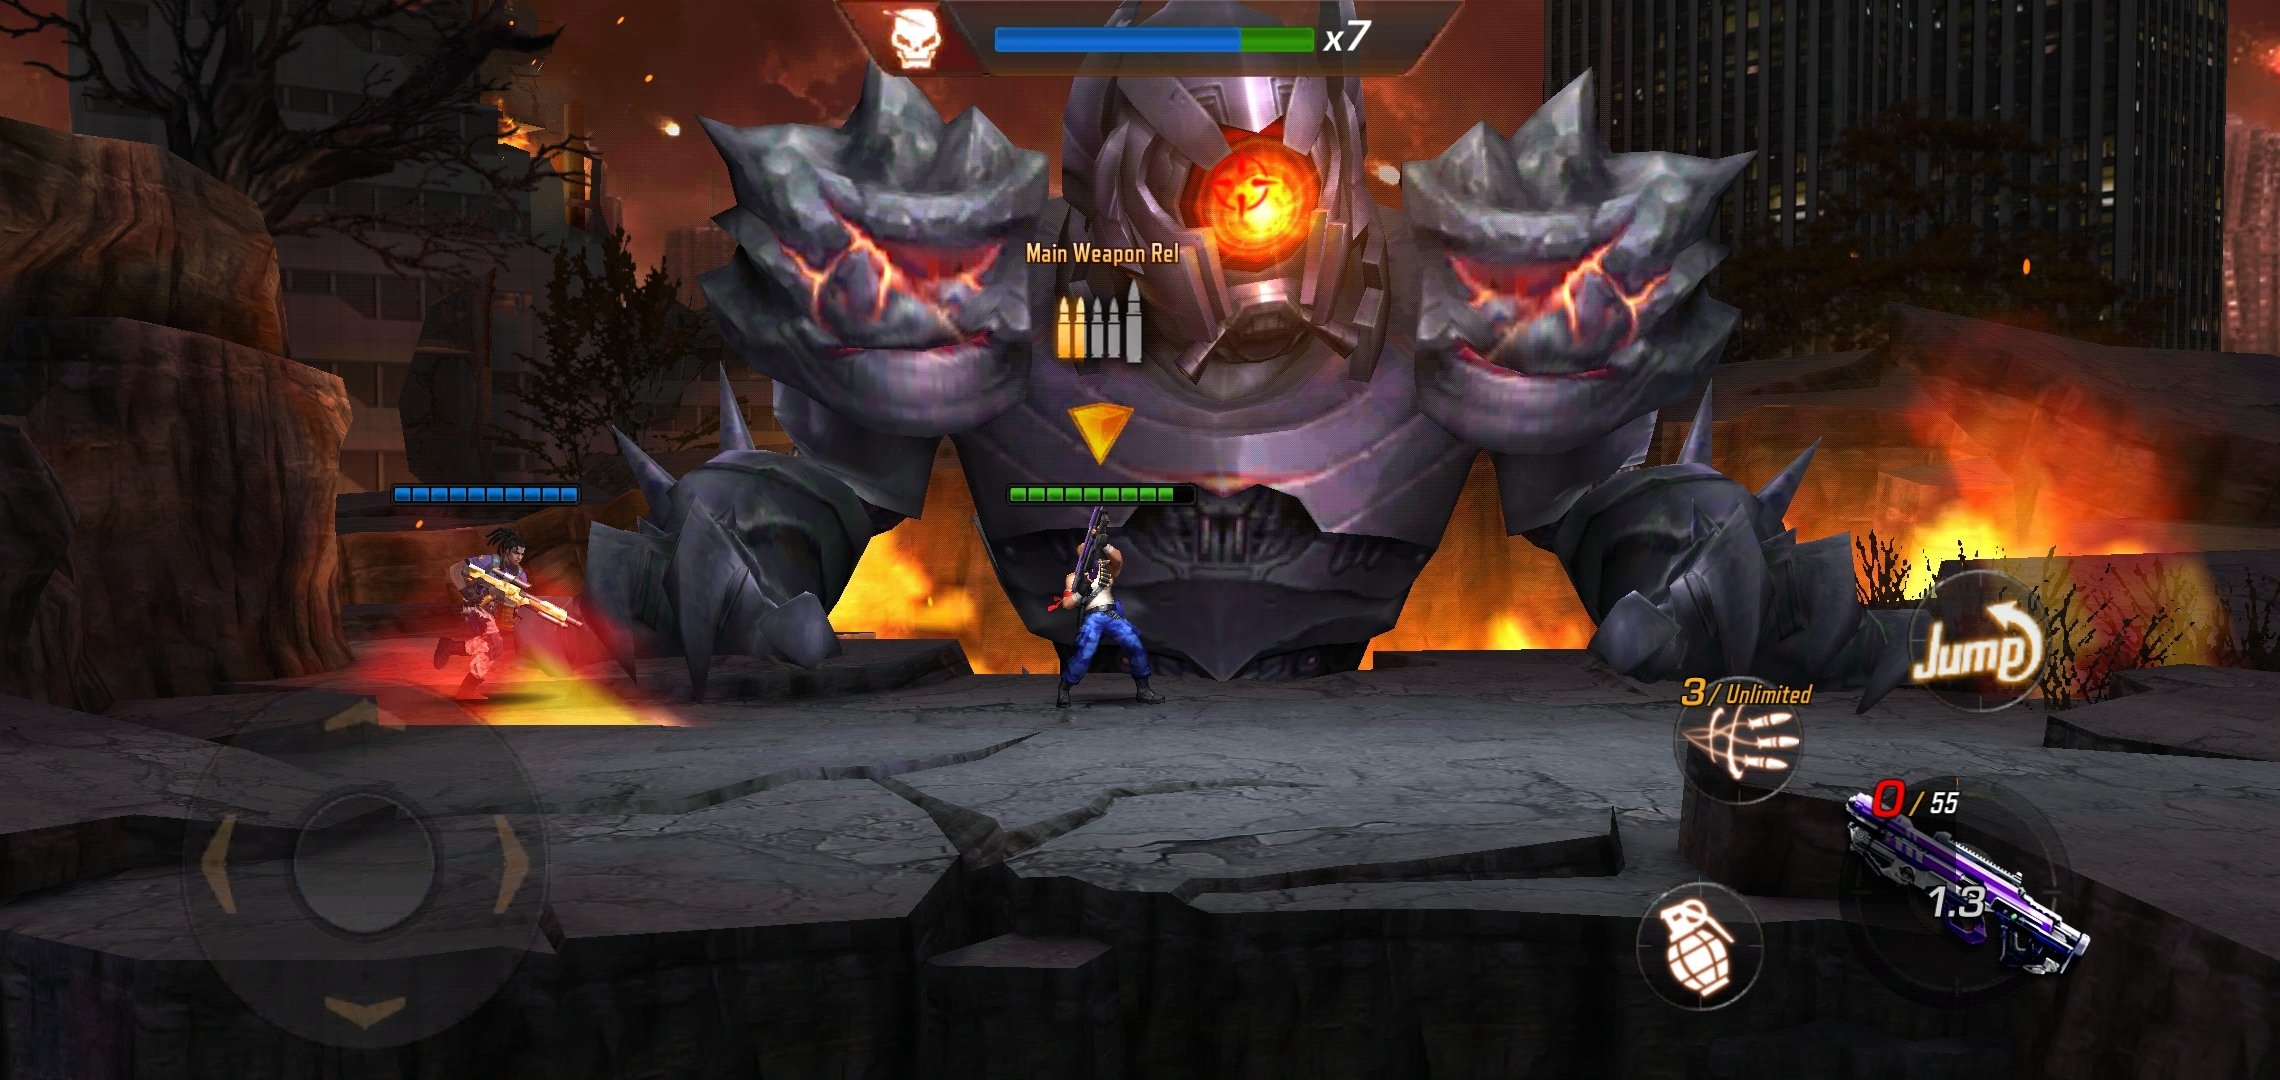 contra video game free download for windows 8